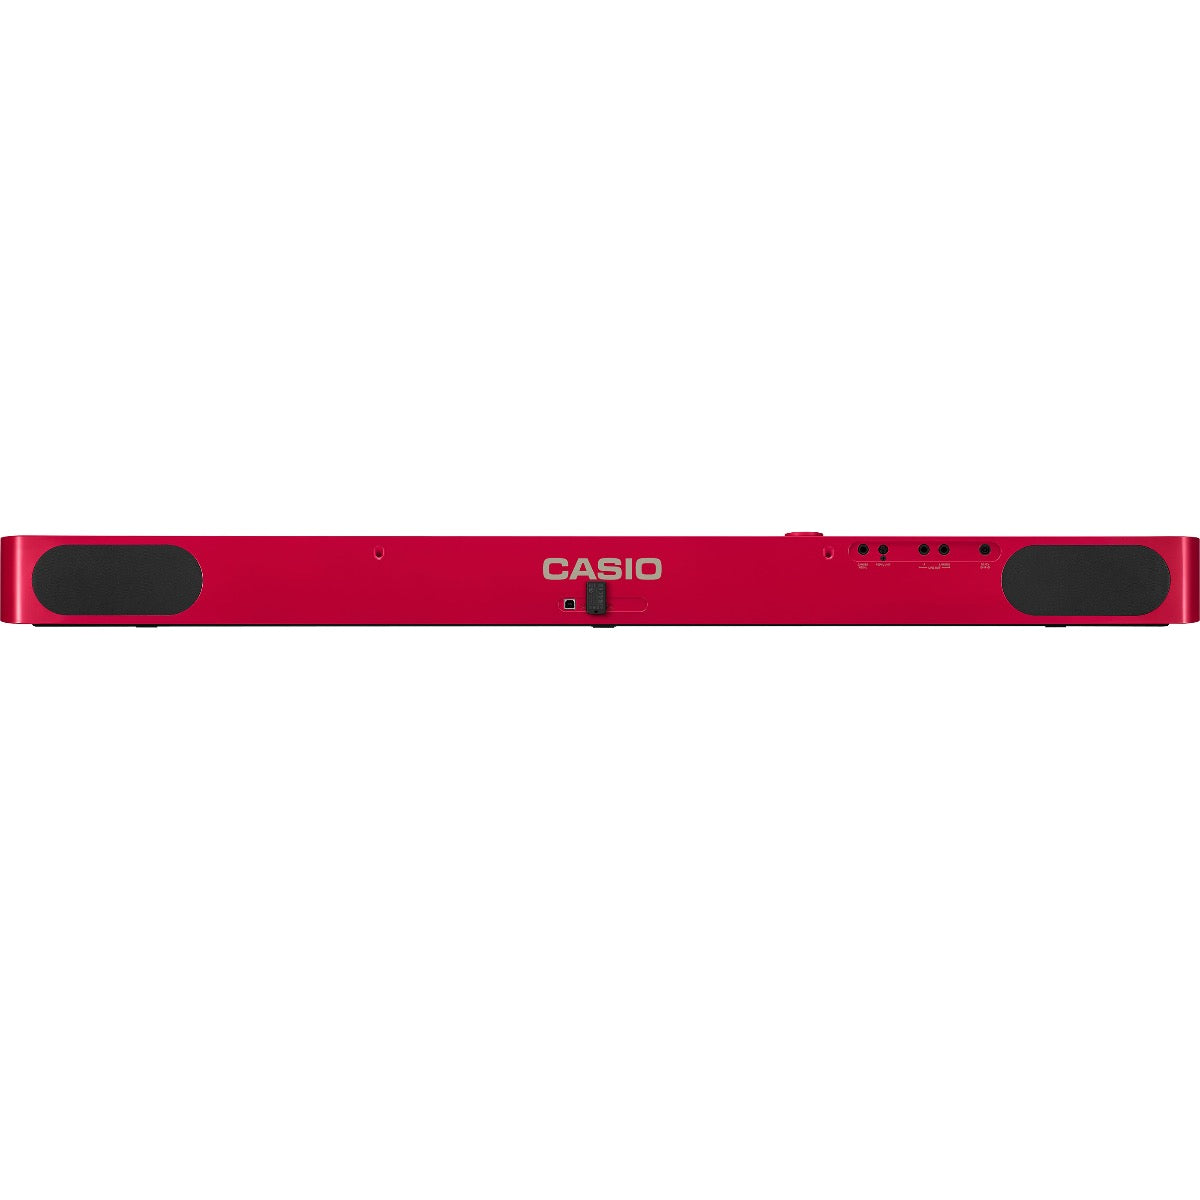 Rear view of Casio Privia PX-S1100 Digital Piano - Red